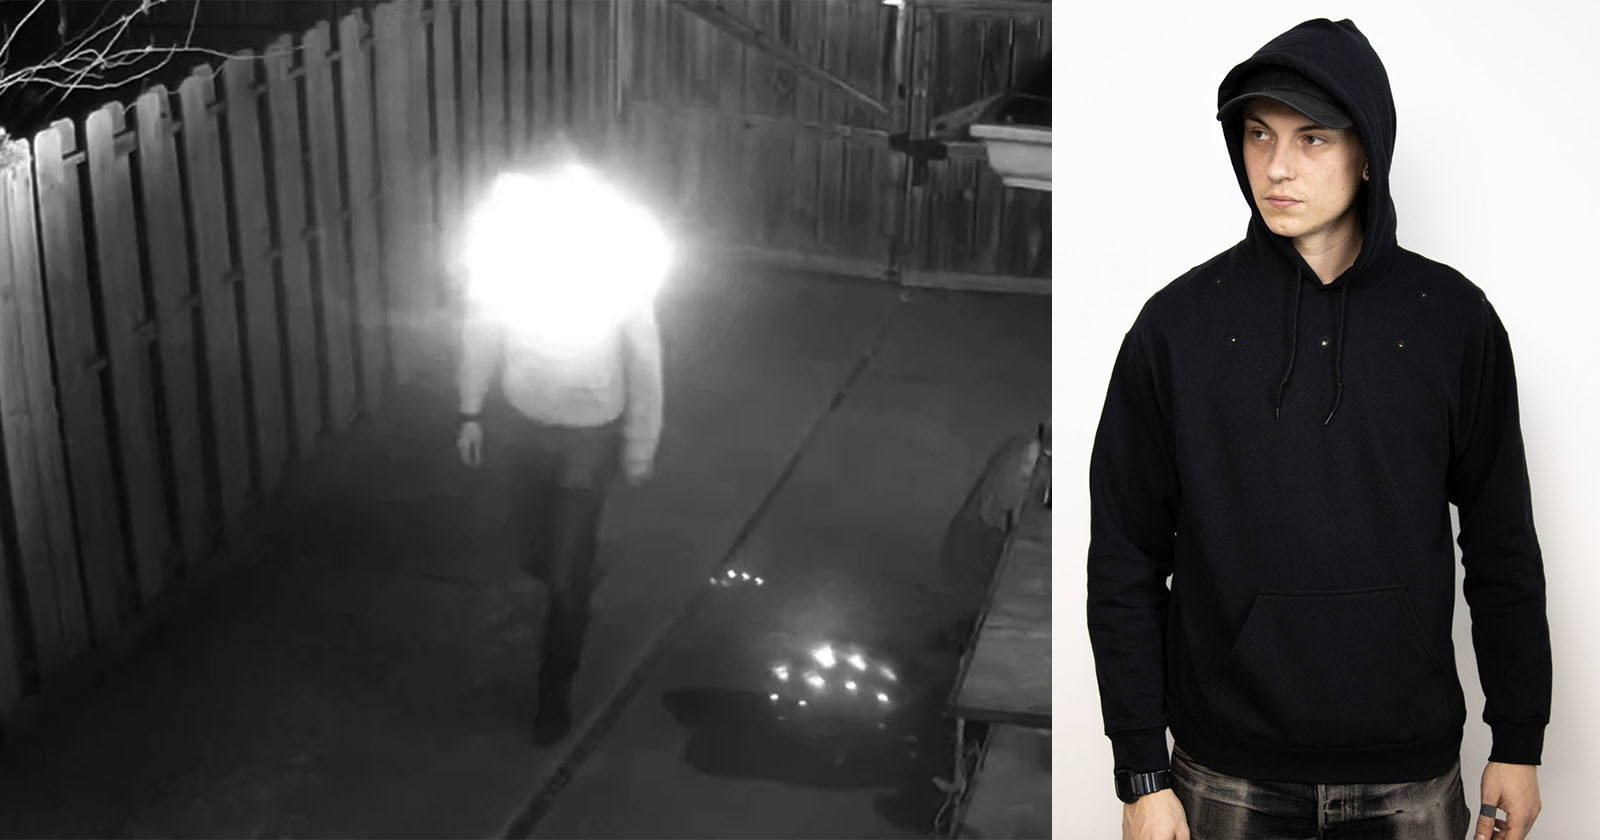 Hacker Hoodie Blinds Surveillance Cameras with Infrared Light